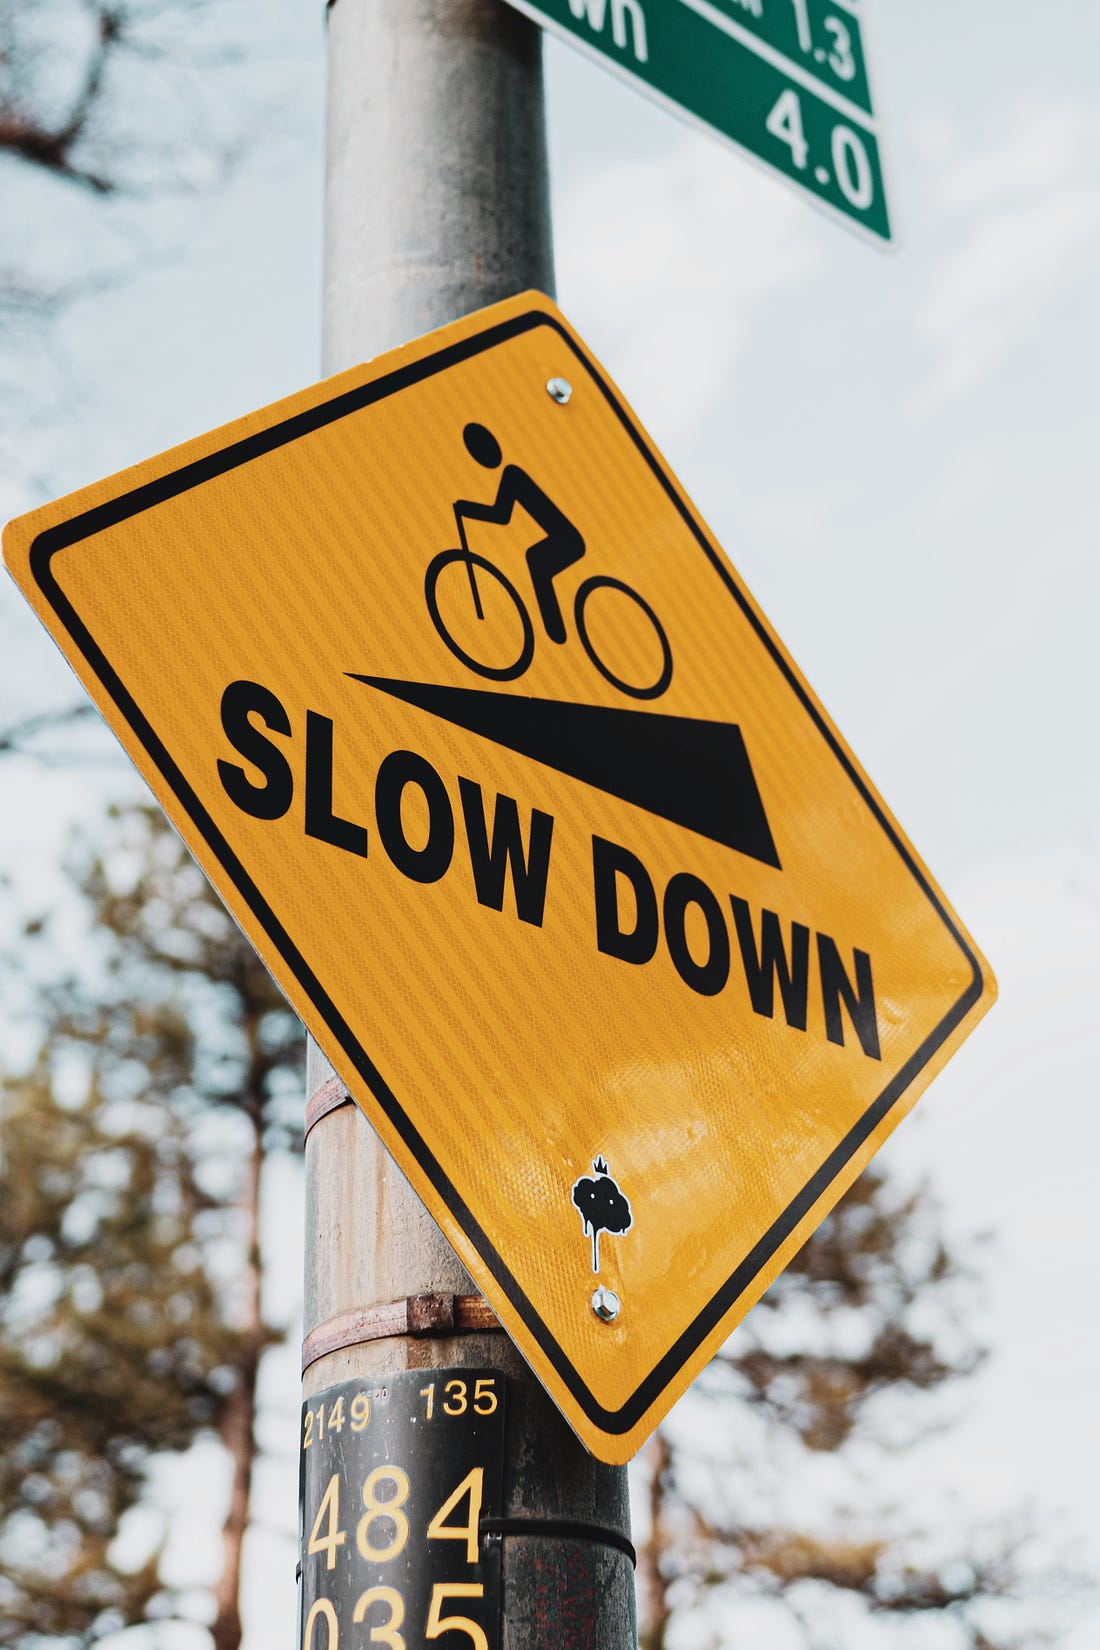 Traffic sign saying "slow down" with image of cyclist